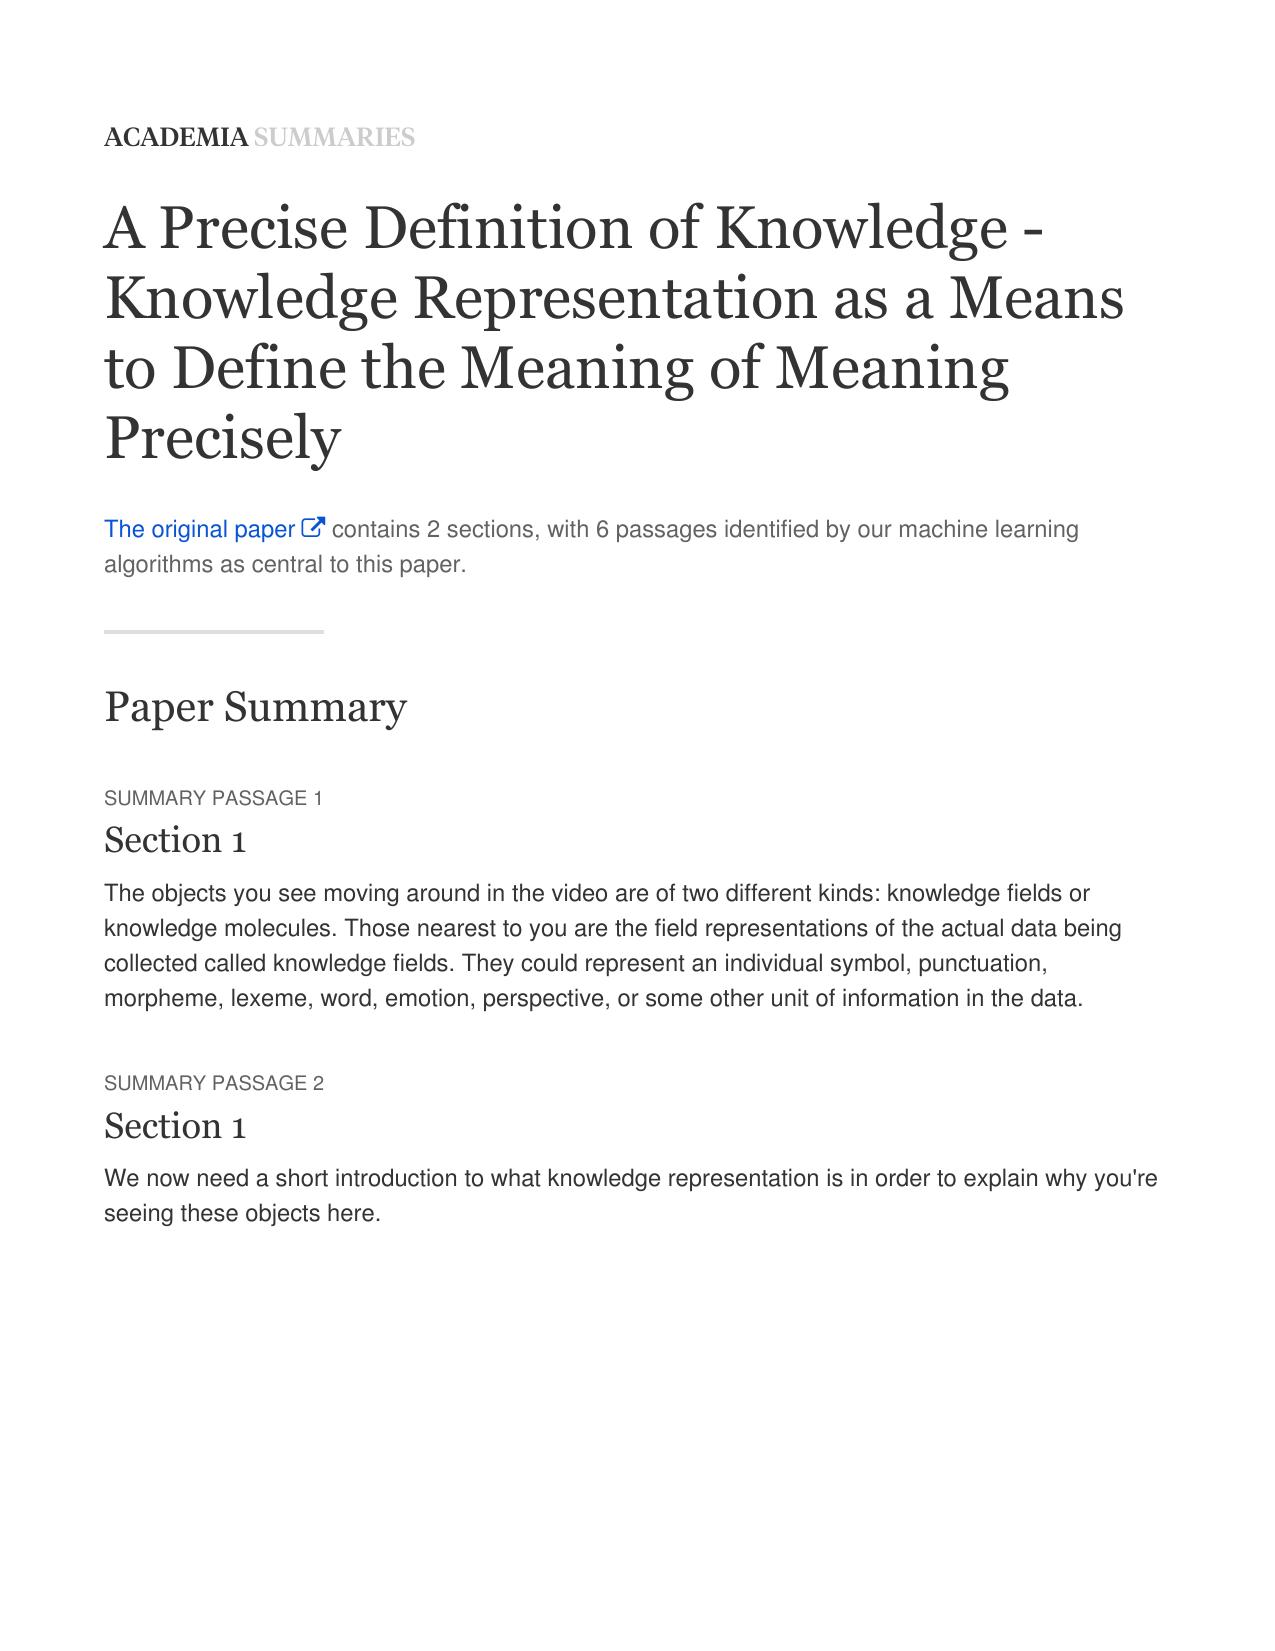 A Precise Definition of Knowledge - Knowledge Representation as a Means to Define the Meaning of Meaning Precisely - Academia Summary